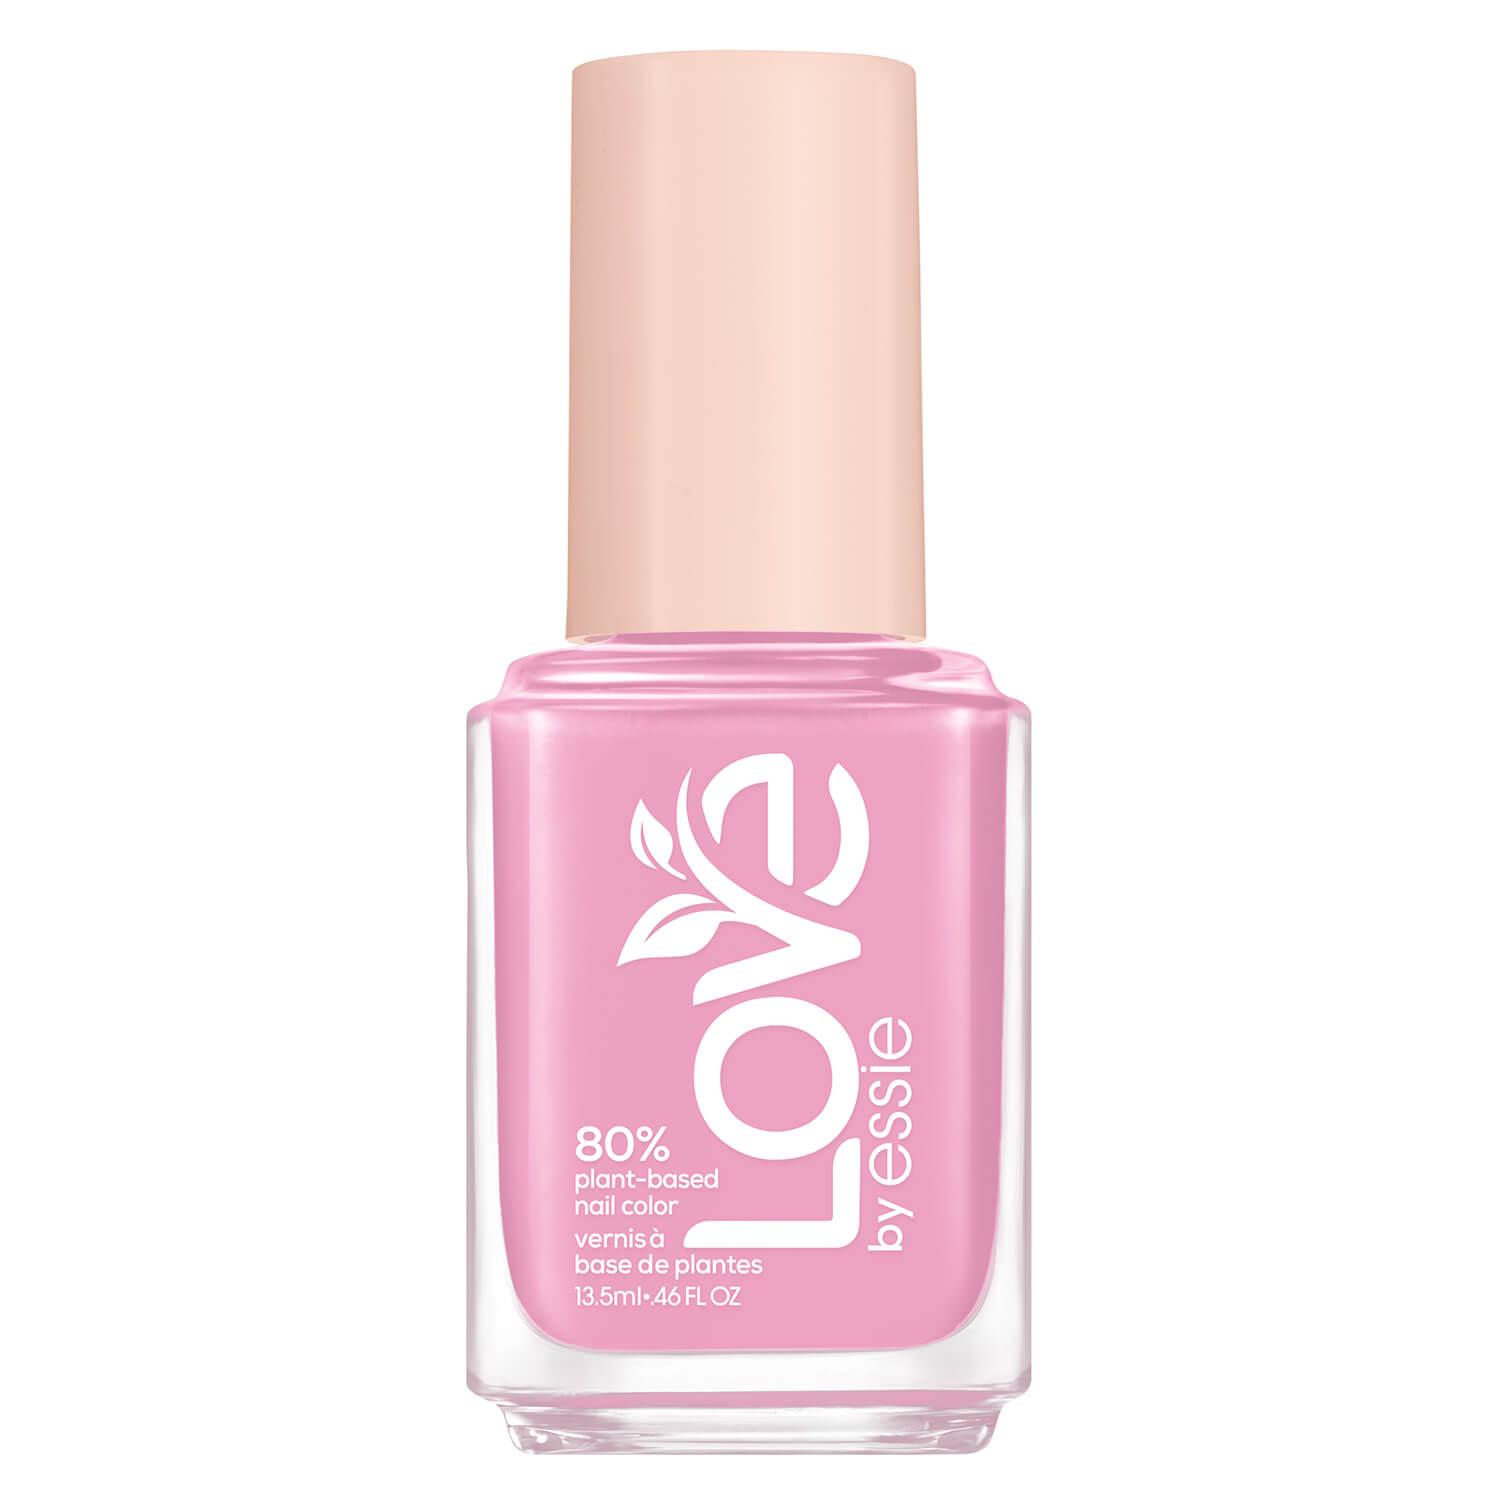 Love by essie - carefree but caring 160